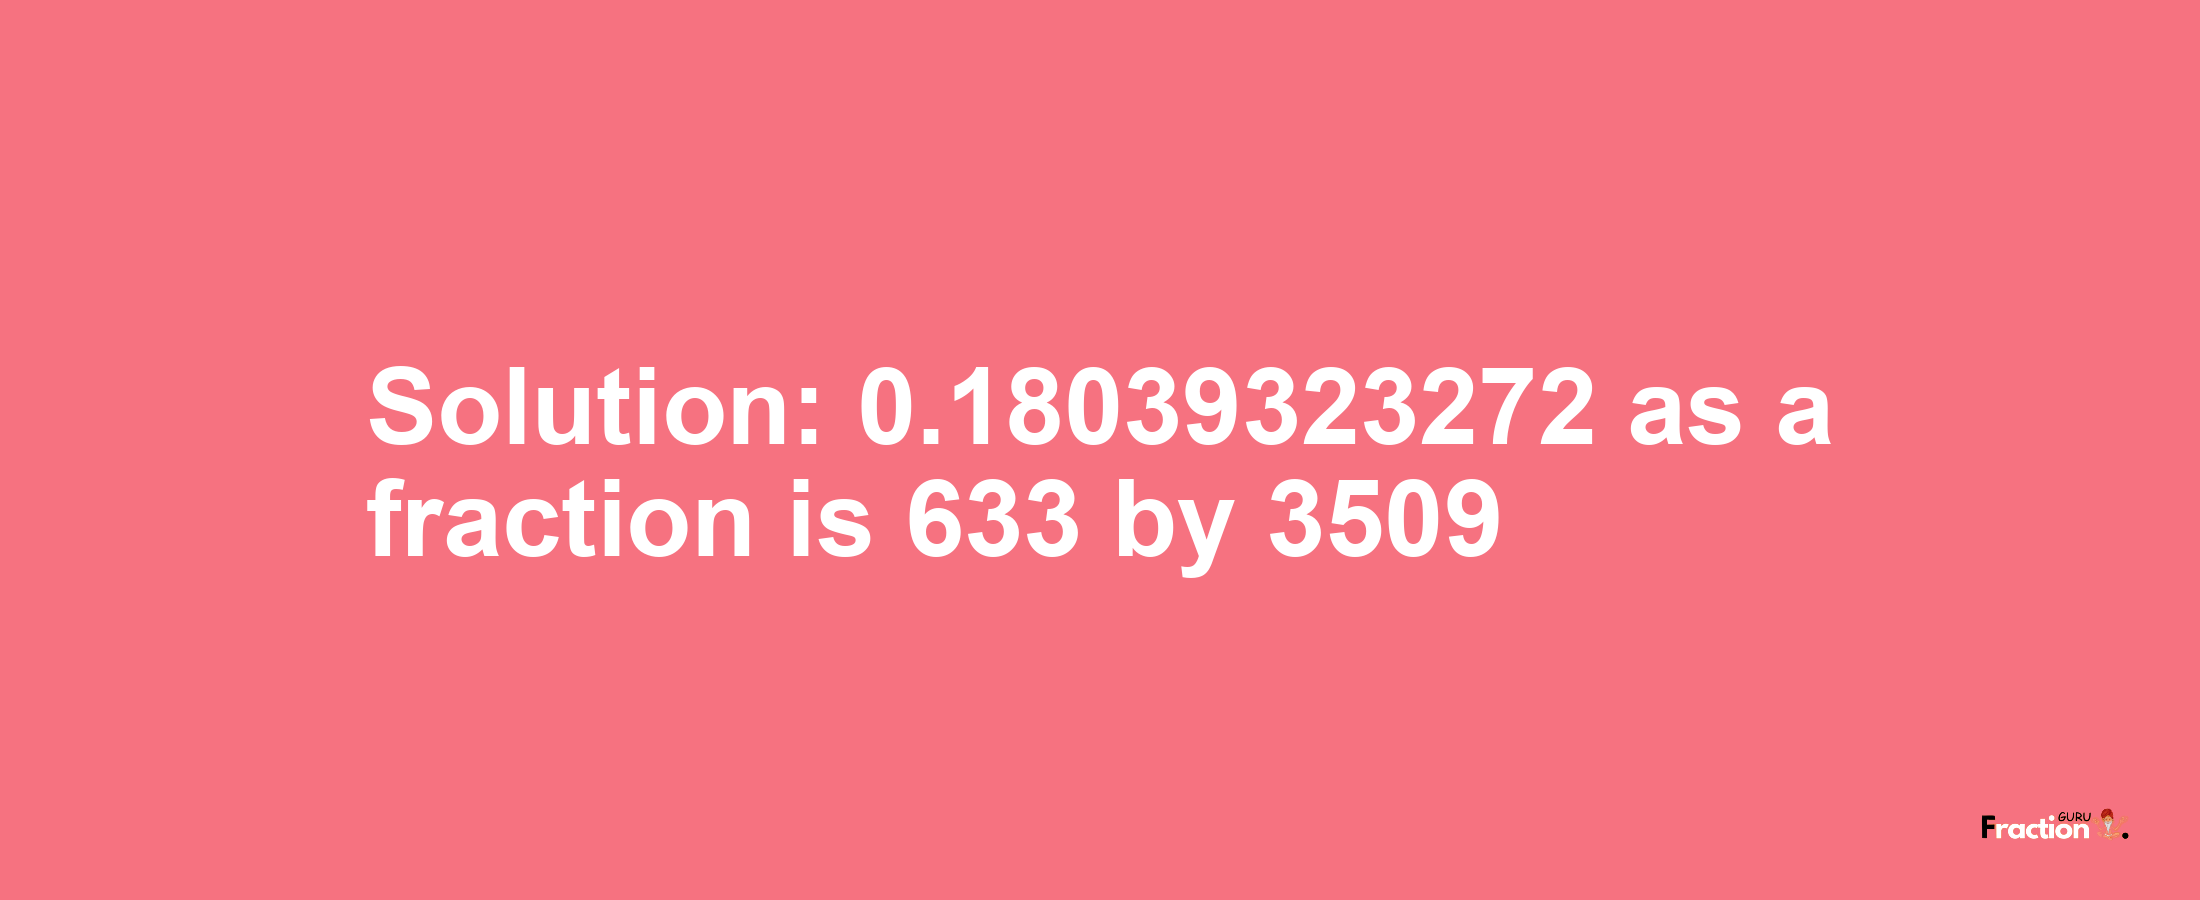 Solution:0.18039323272 as a fraction is 633/3509